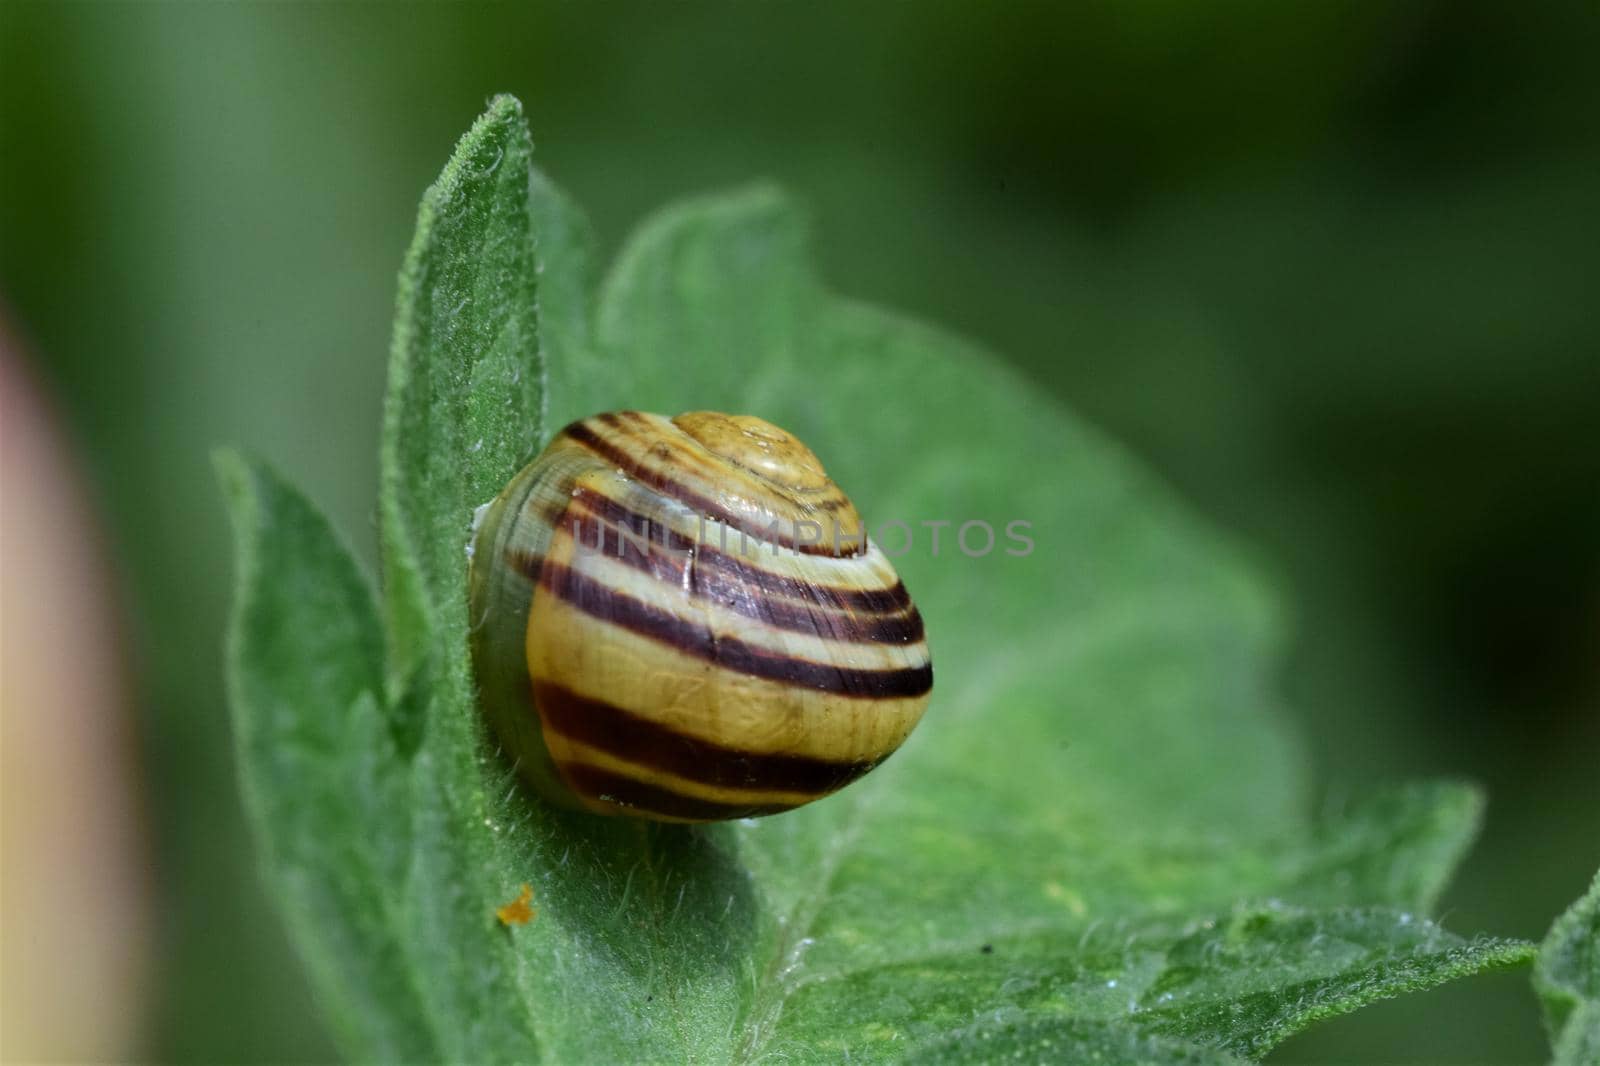 Housing snail - Cepaea hortensis on a tomato leaf by Luise123